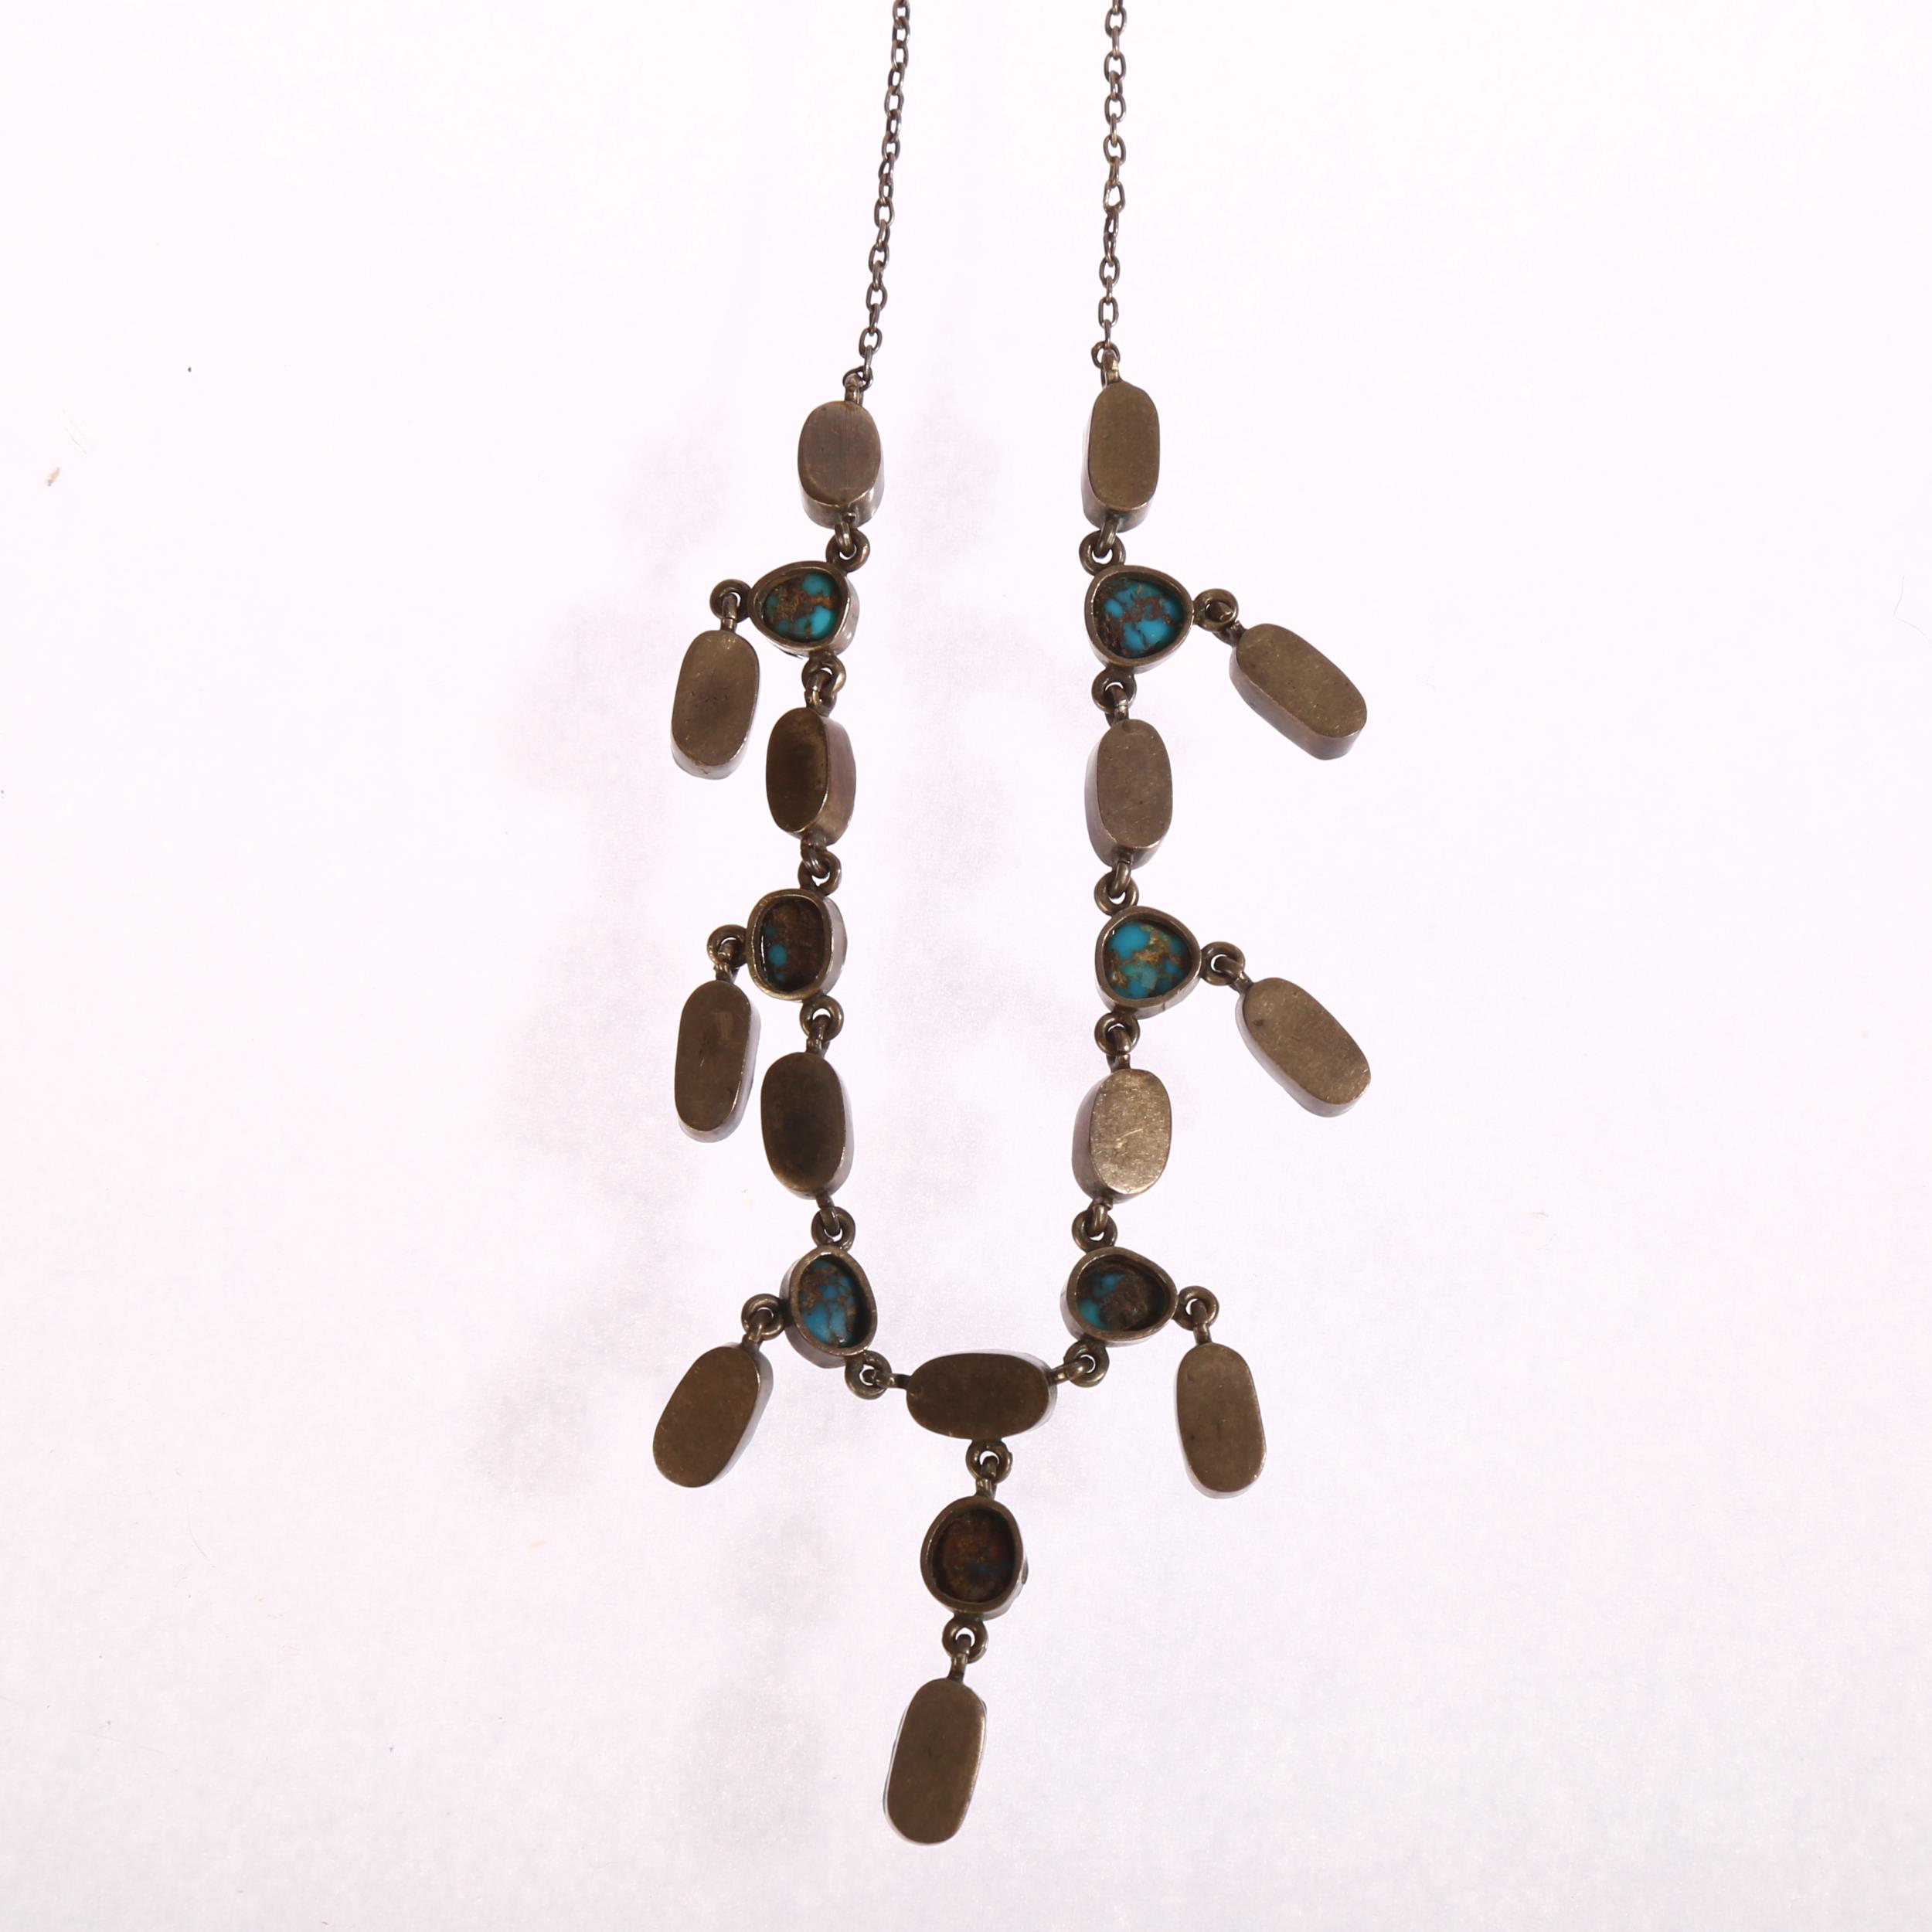 A silver turquoise and mother-of-pearl set fringed necklace, mid-20th century, length 41cm, unmarked - Image 3 of 3